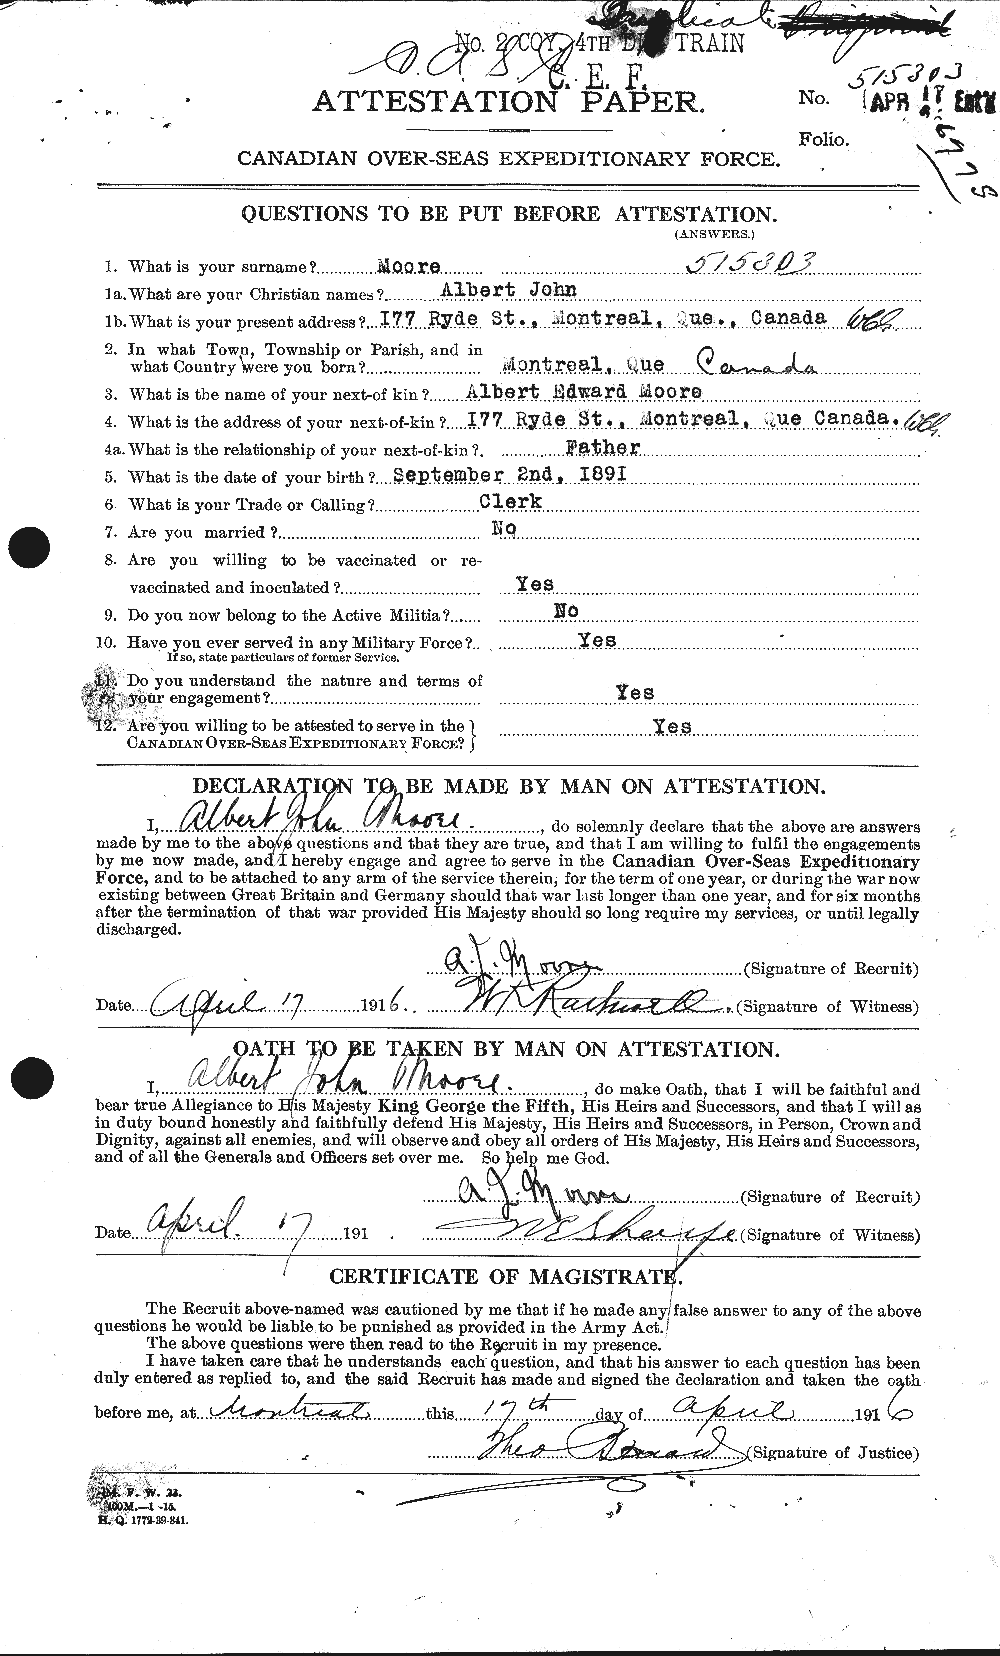 Personnel Records of the First World War - CEF 506352a